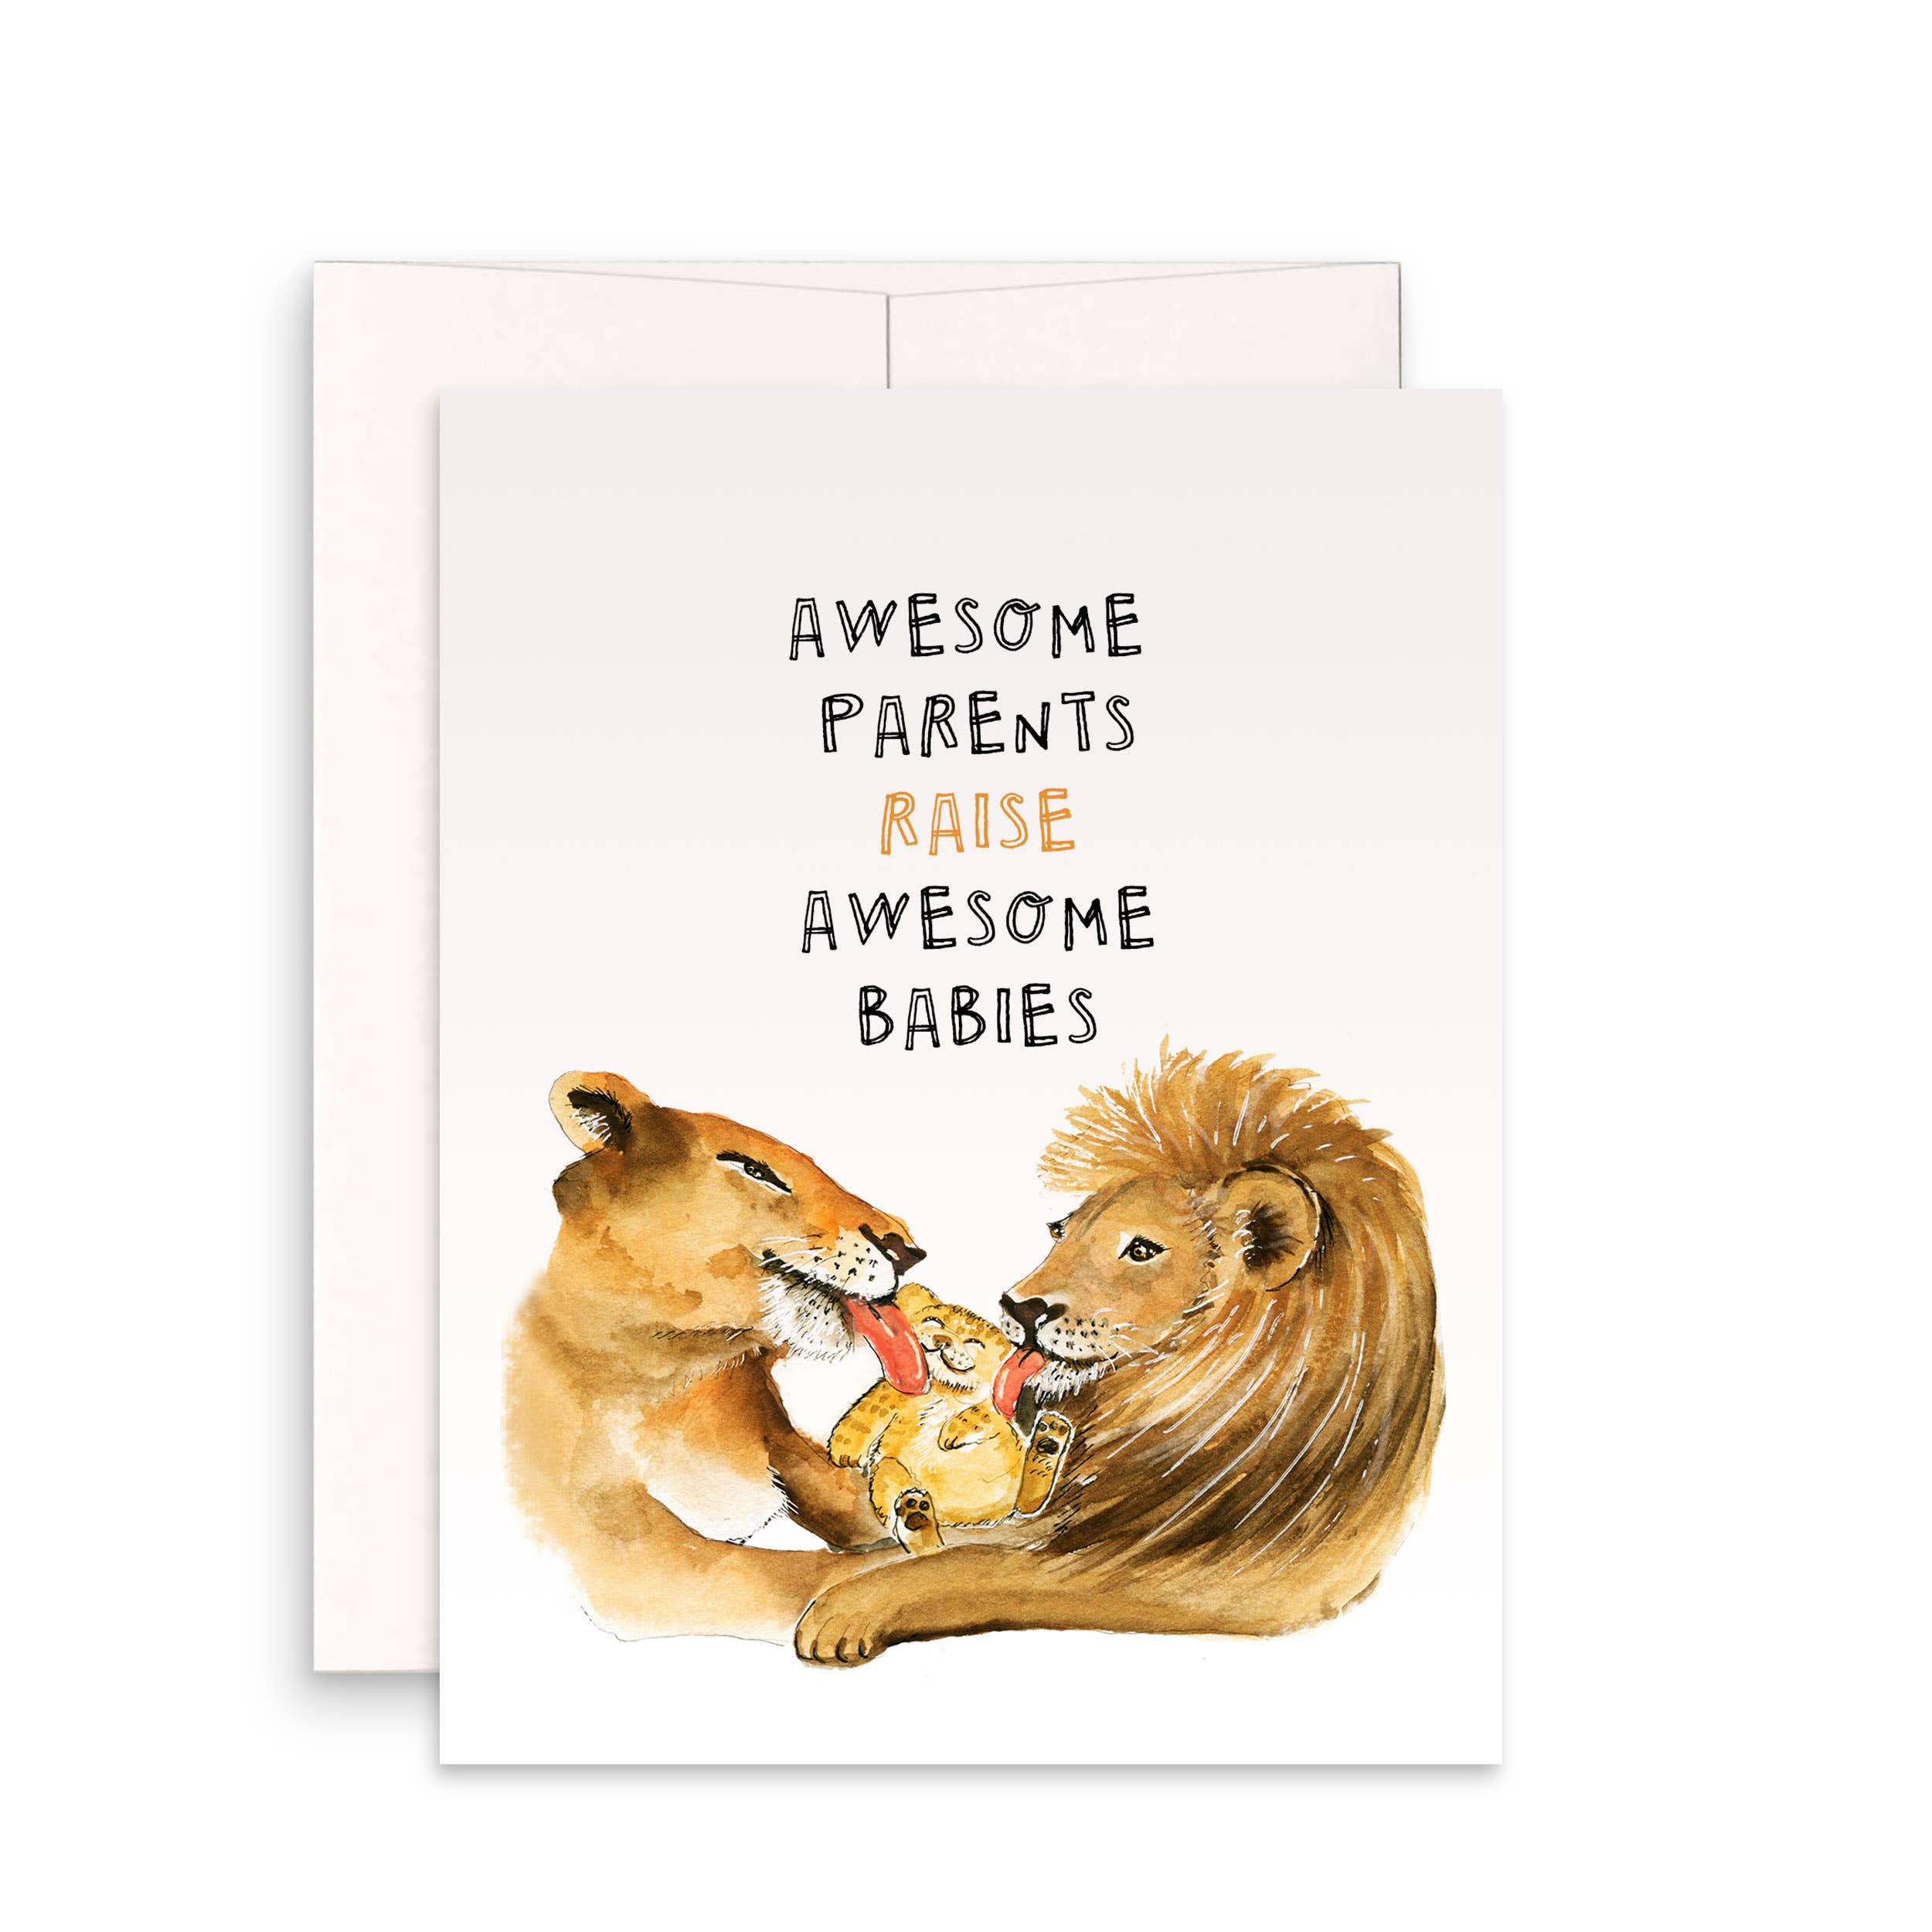 Awesome Parents raise awesome babies greeting card with lion and cub